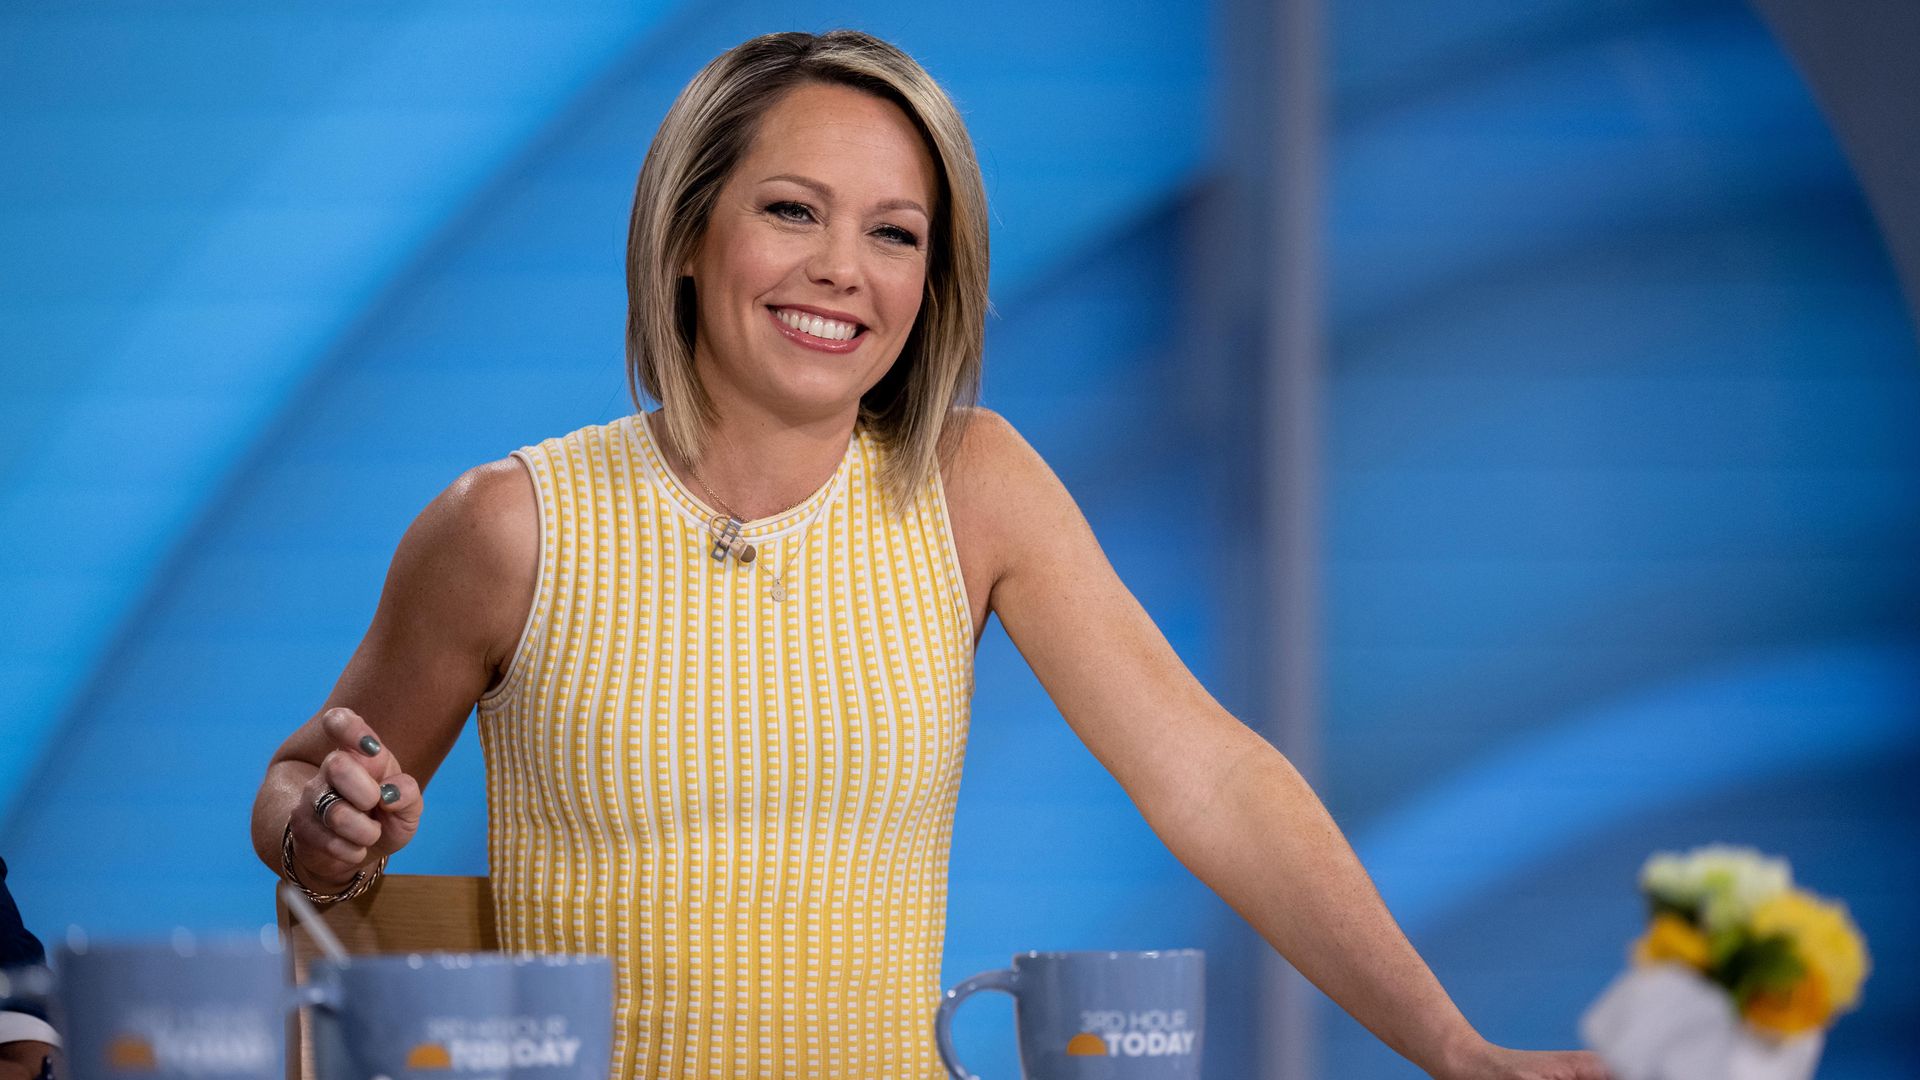 andre comer recommends dylan dreyer up skirt pic